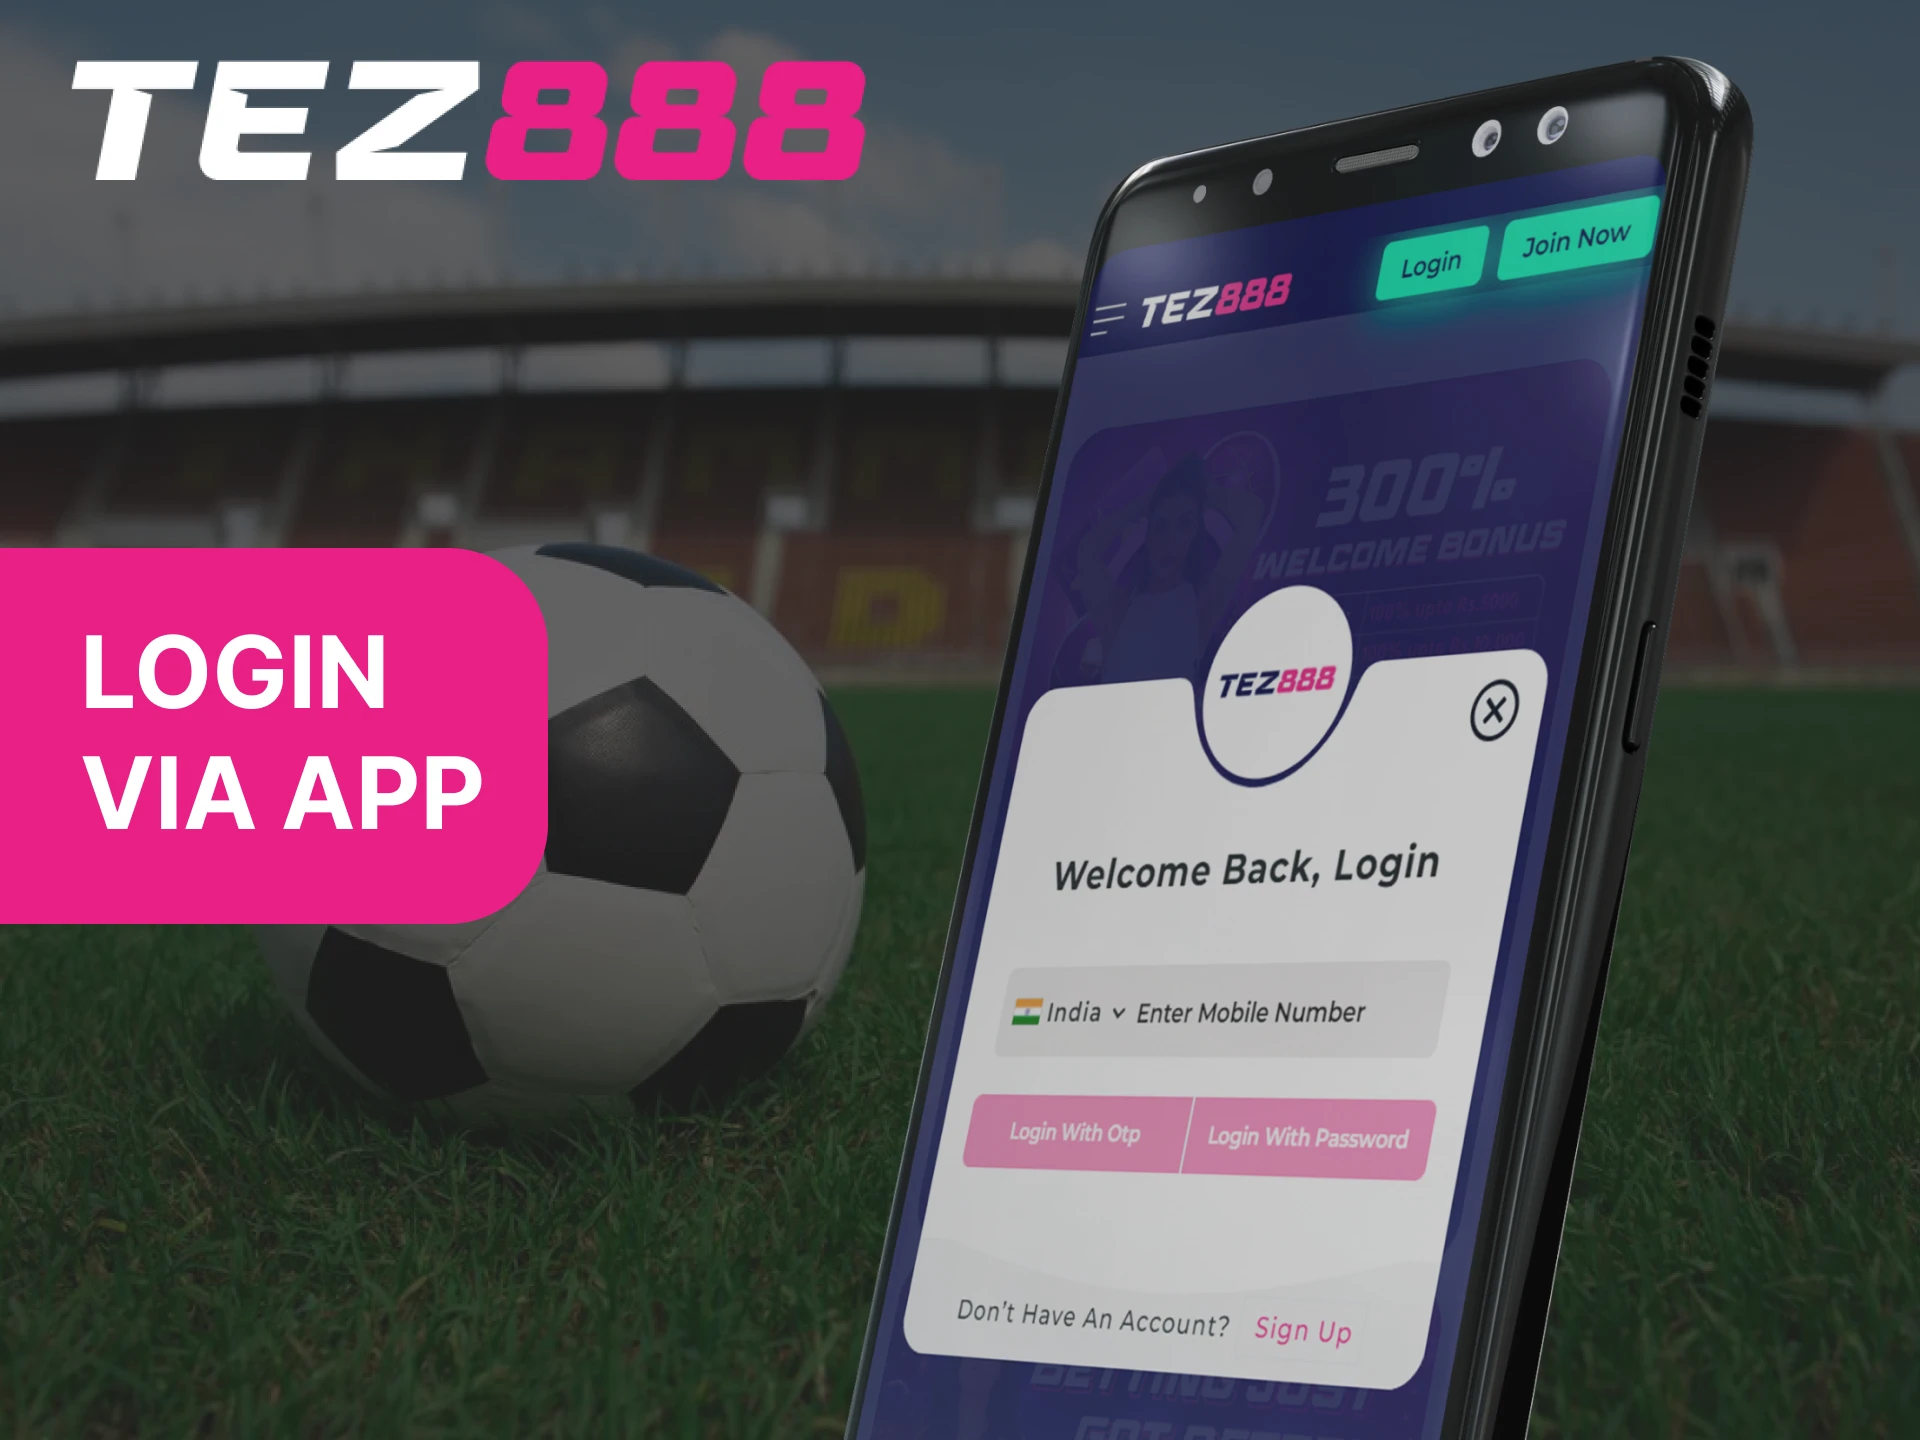 When logging into Tez888, you can use not only your password, but also Face ID.